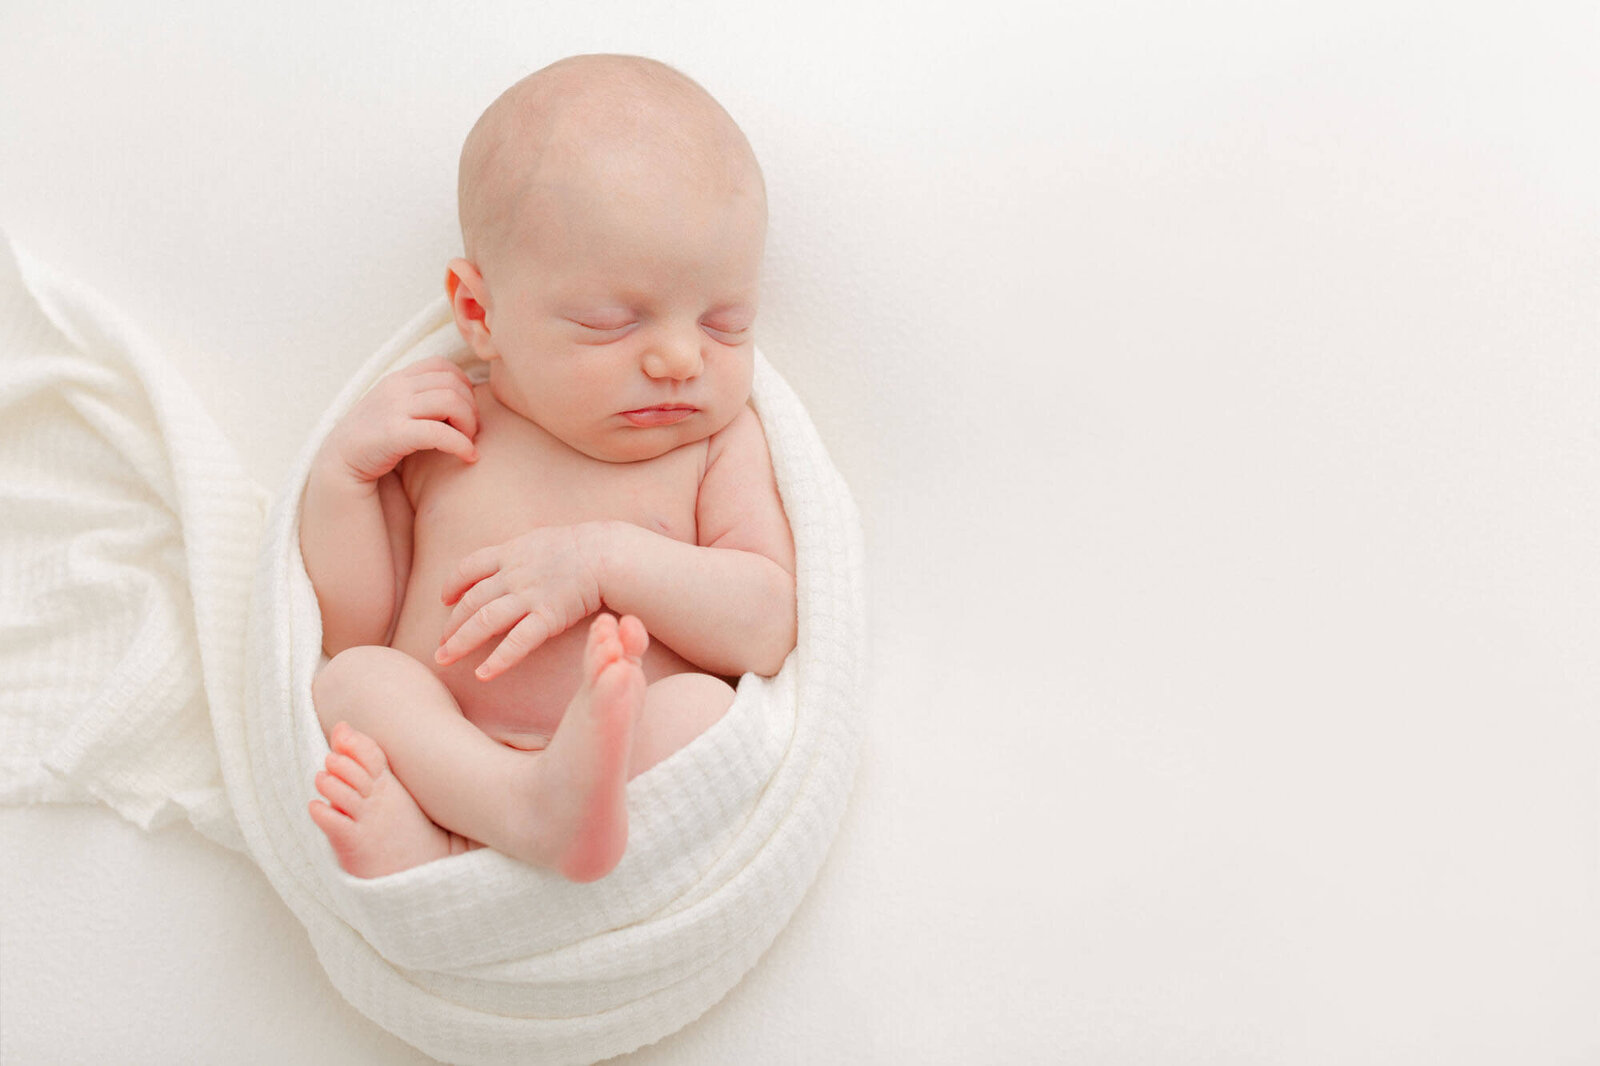 Baby sleeping on back on a soft cream colored backdrop. Baby has a white textured blanket wrapped around her body with her belly, arms, and legs showing.